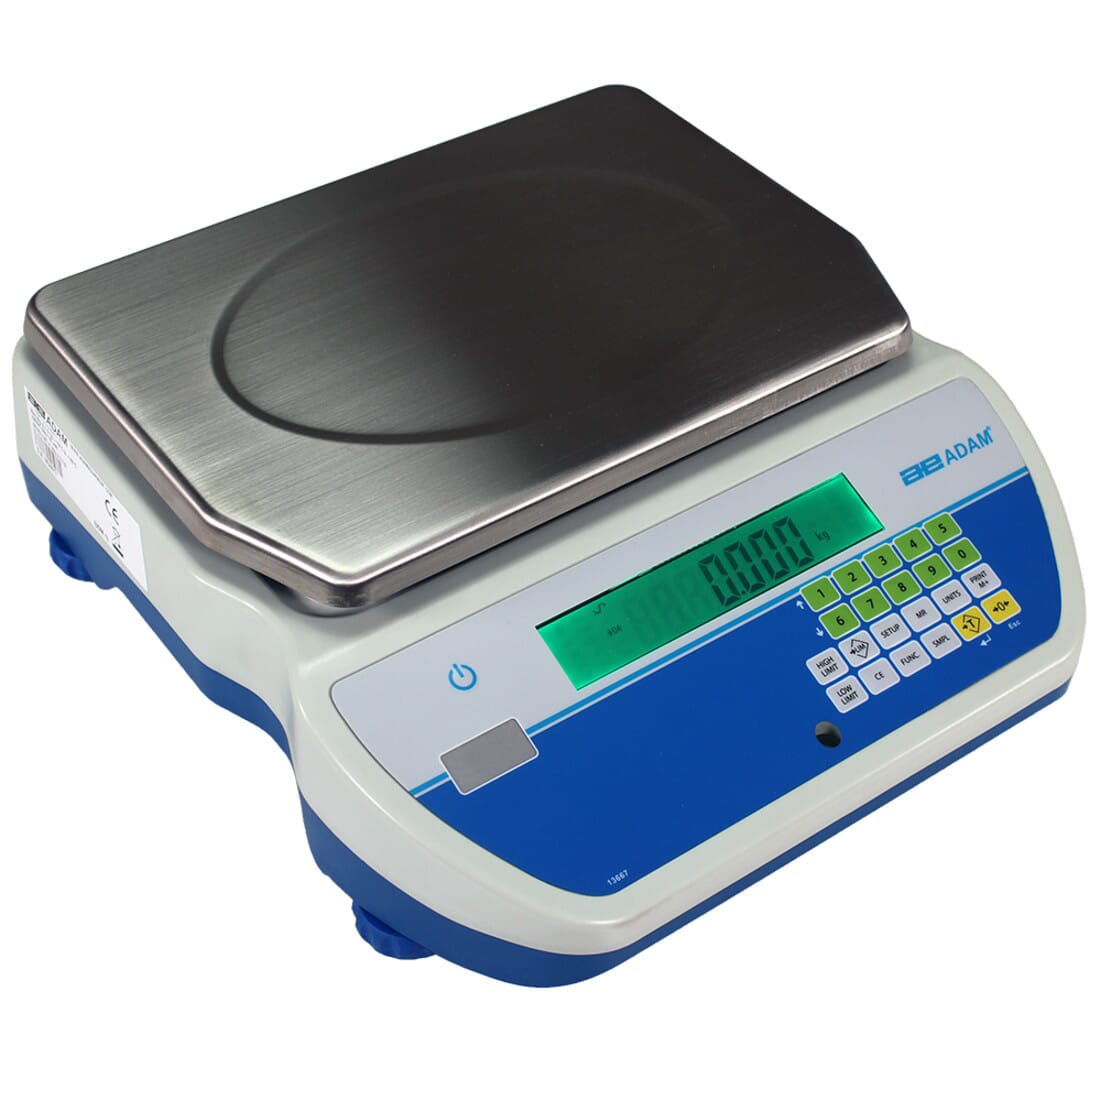 Cruiser CKT-M Approved Bench Checkweighing Scales-CKT 20M